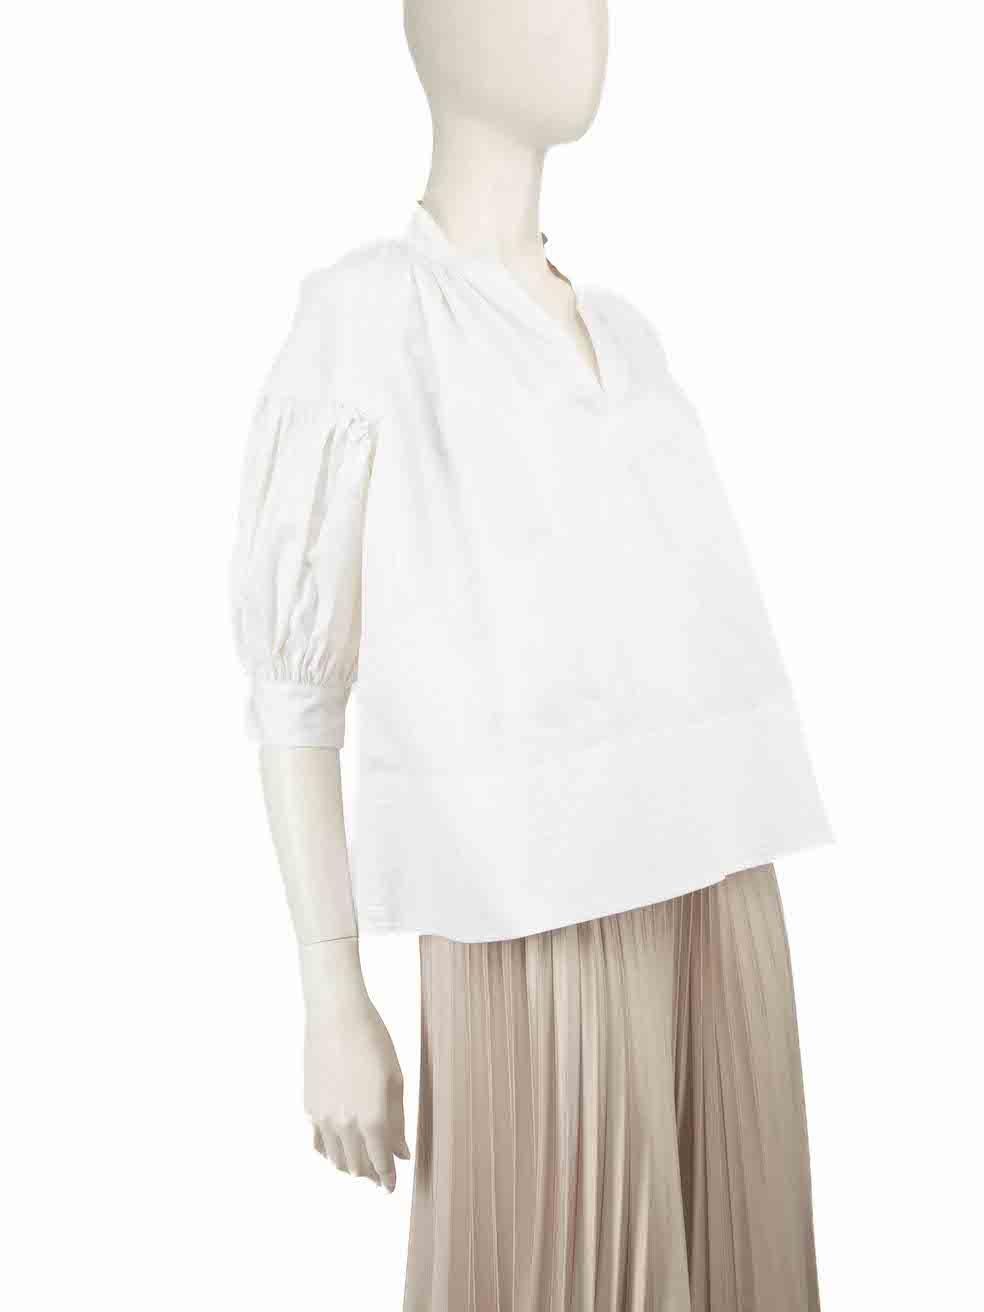 CONDITION is Very good. Hardly any visible wear to top is evident on this used CO designer resale item.
 
 
 
 Details
 
 
 White
 
 Cotton
 
 Top
 
 Short puff sleeves
 
 V-neck
 
 Buttoned cuffs
 
 
 
 
 
 Made in China
 
 
 
 Composition
 
 100%